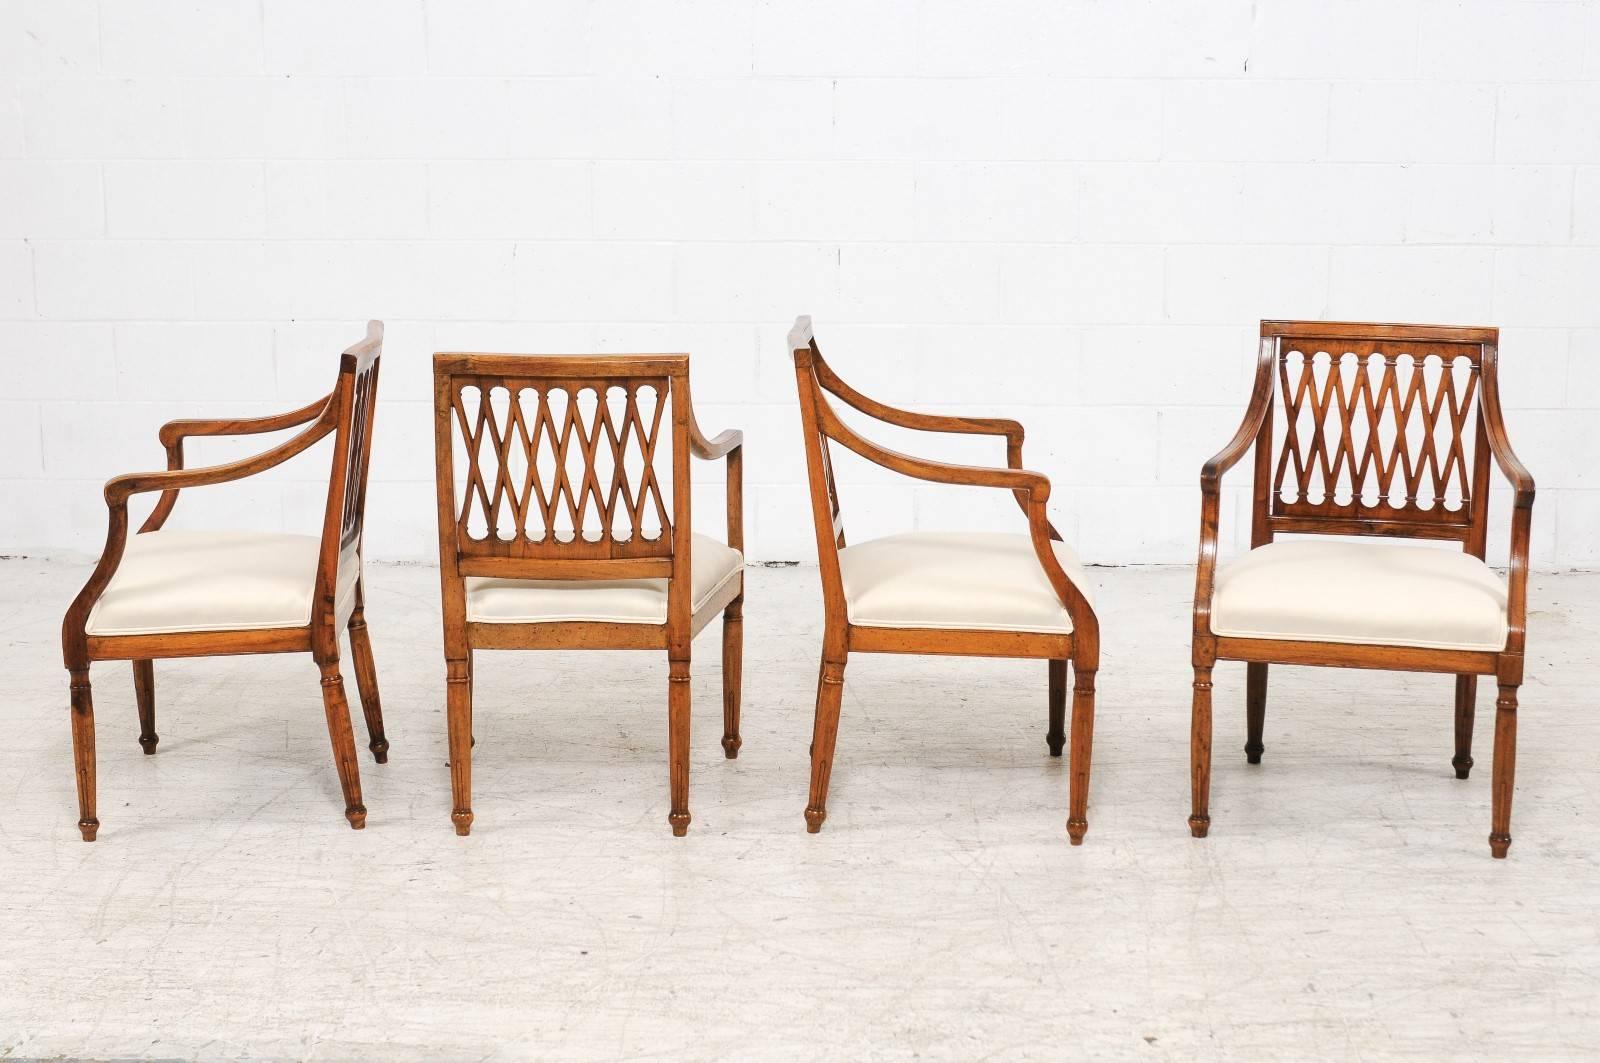 Set of Four Italian Vintage Upholstered Chairs with Latticed Backs, circa 1930 3